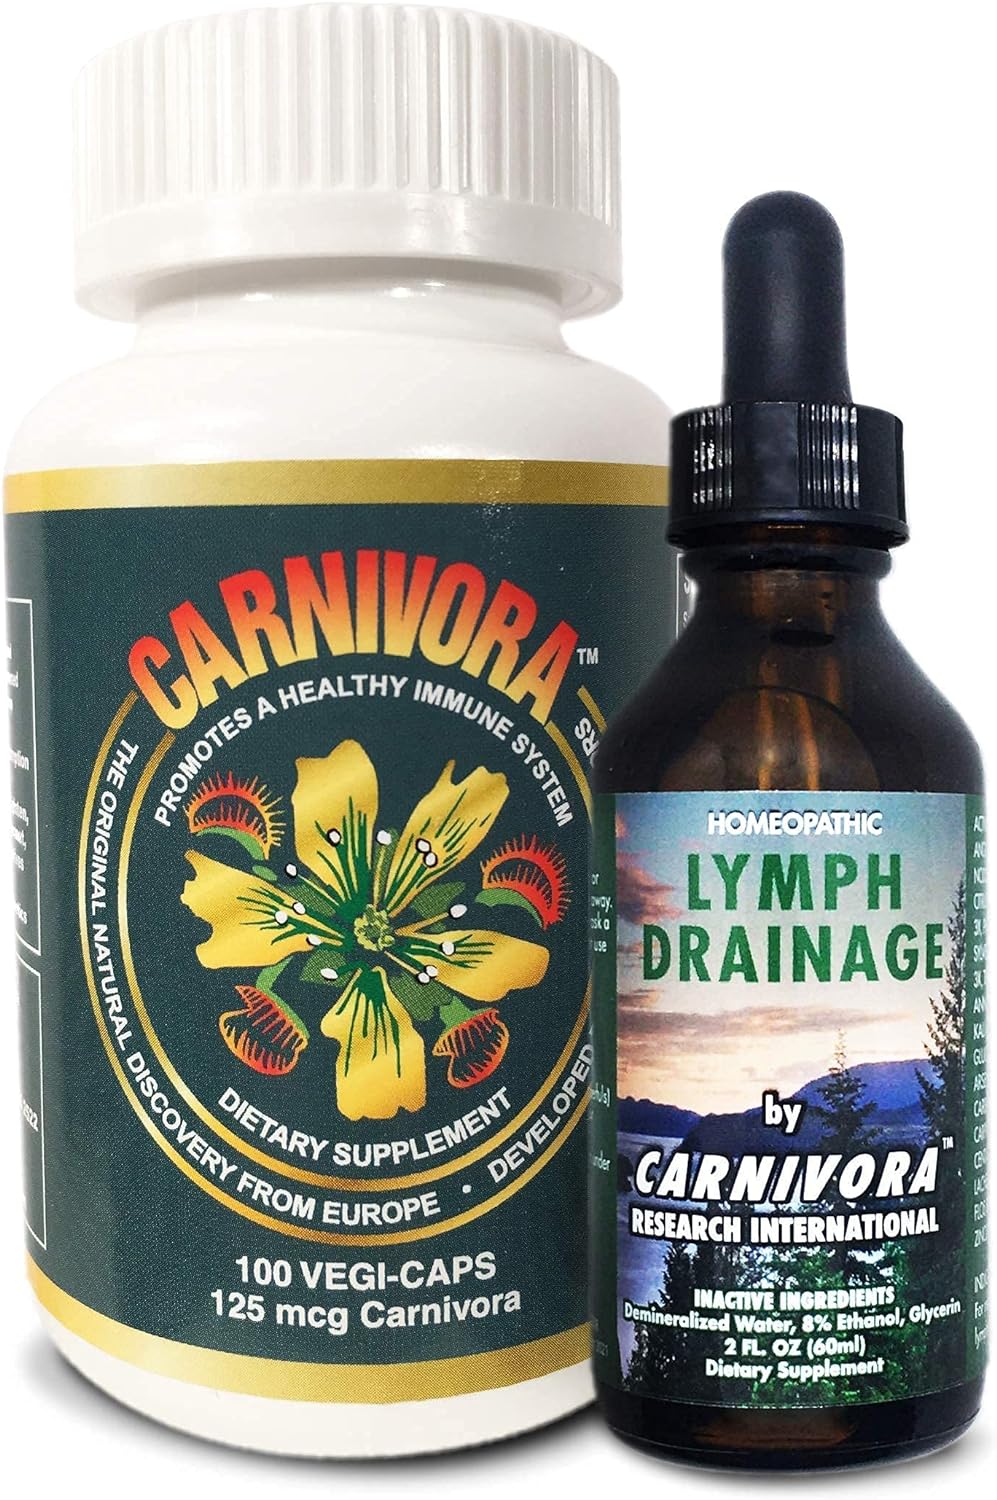 Carnivora The Ultimate Combo - Vegi Caps and Lymph Drainage to Support Immune System and Flush Out Waste (Bundle with 1 Bottle Vegi Caps and 1 Bottle Lymph Drainage)